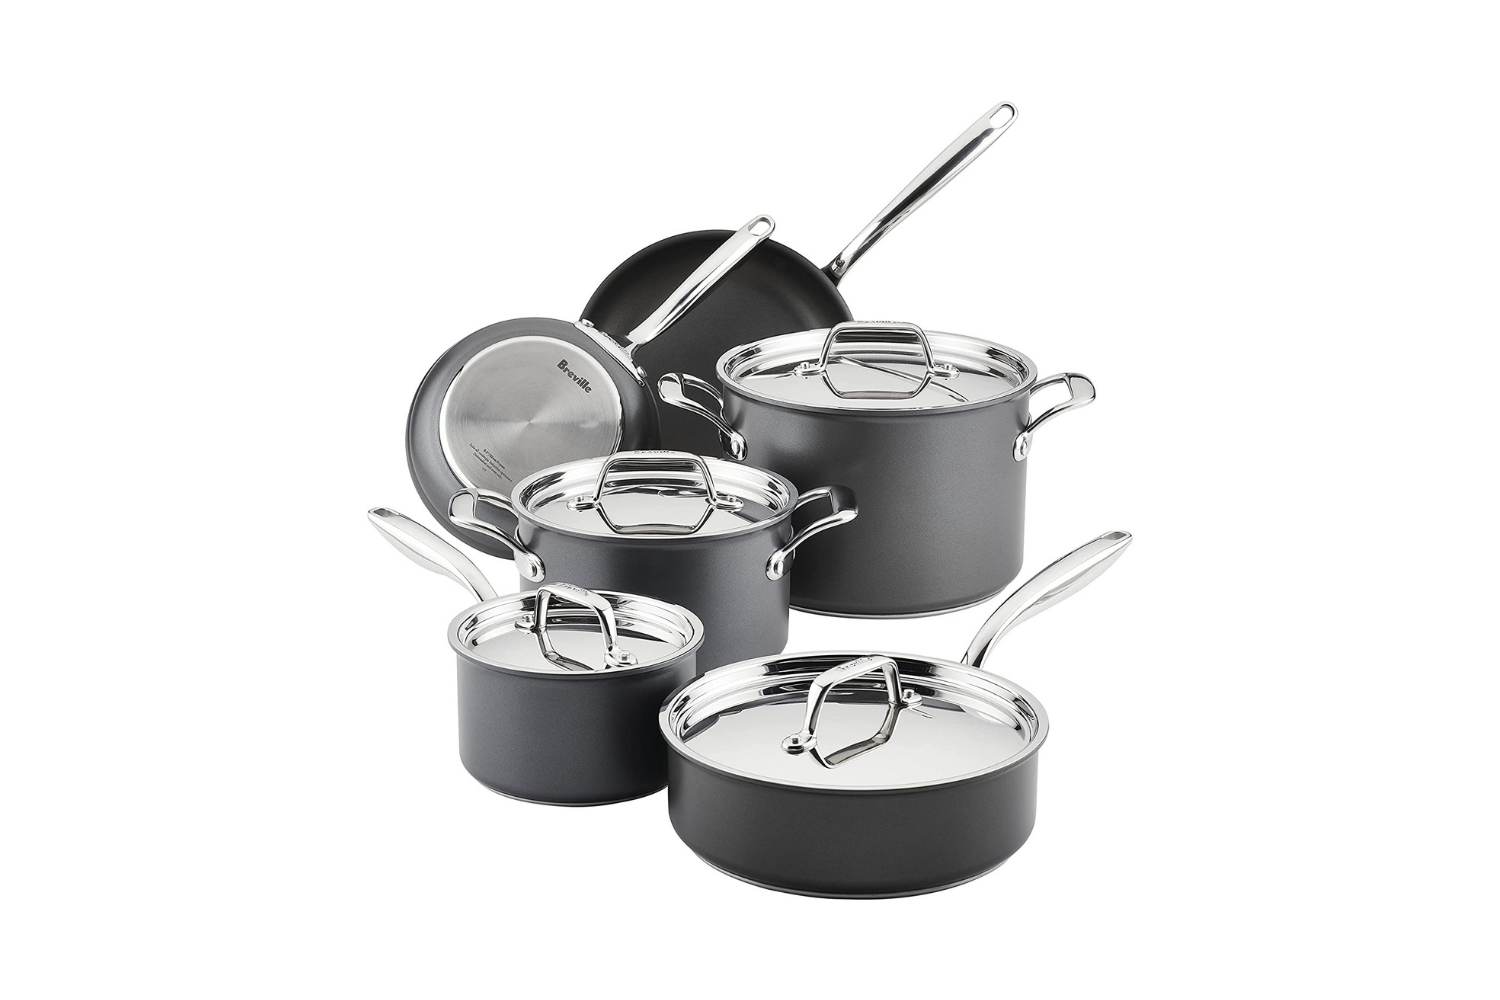 Breville Thermal Pro Hard 10-Piece Nonstick Cookware Set